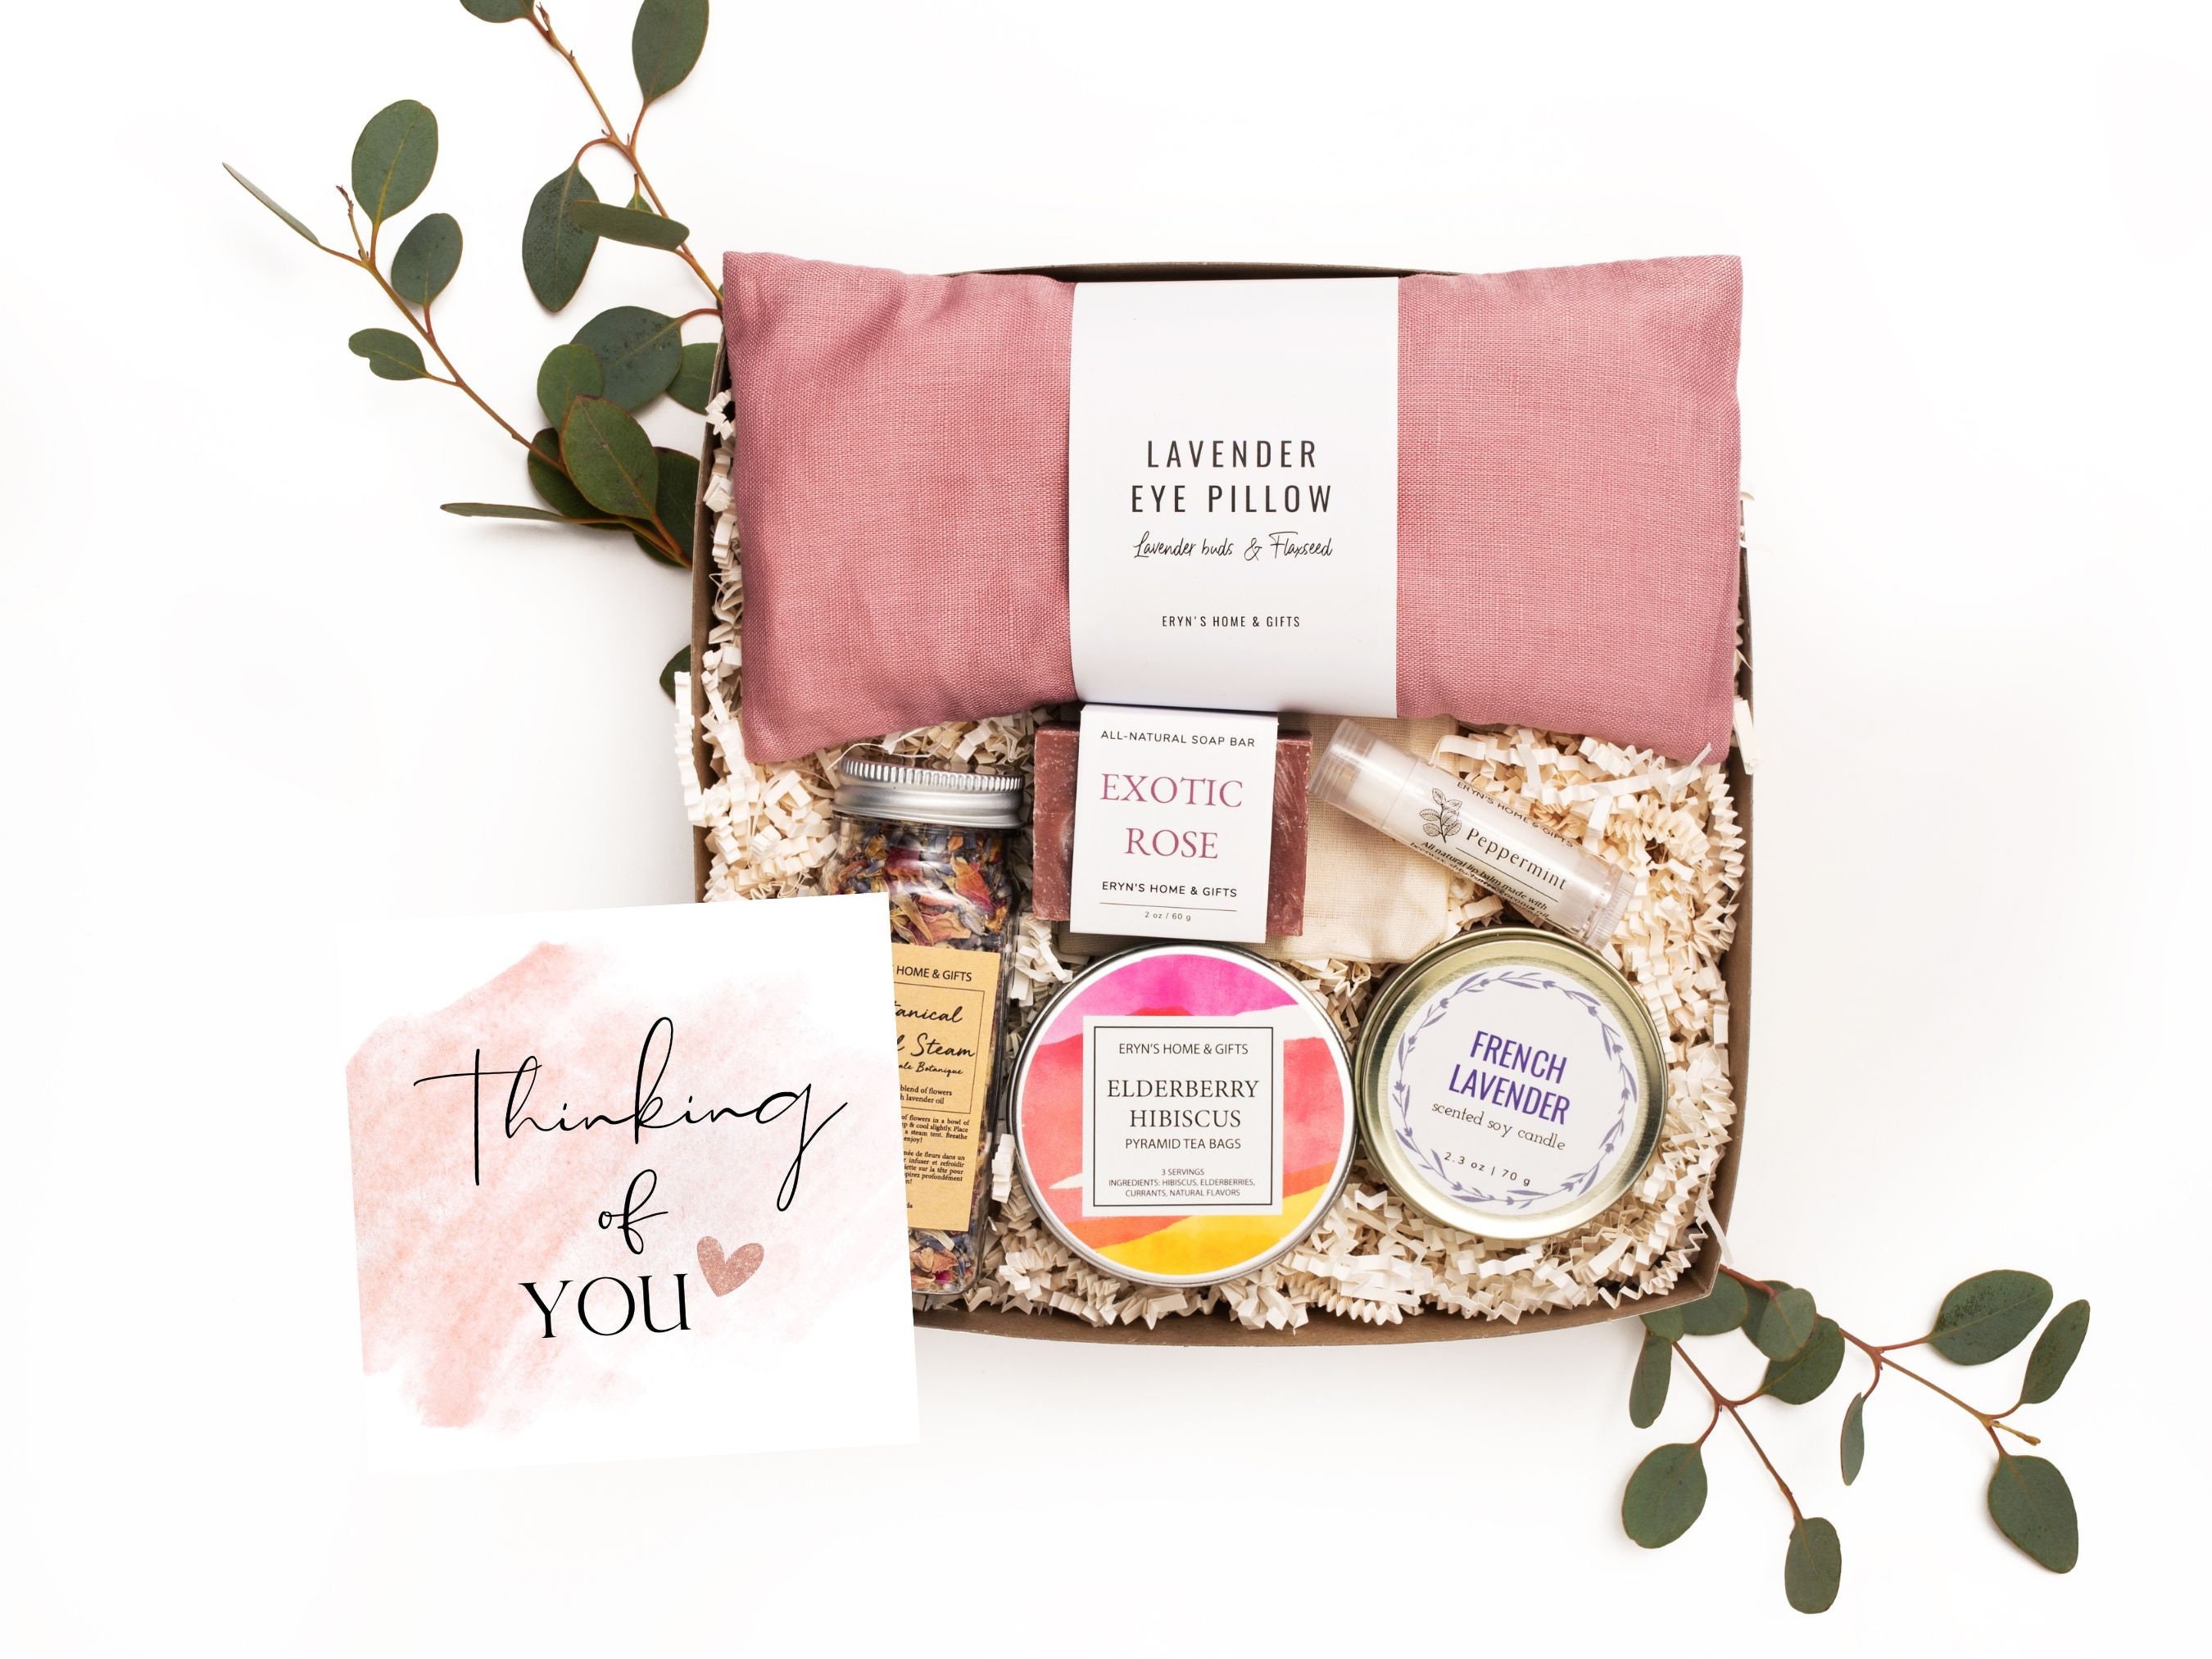  Birthday Gifts for Women Sunshine Gifts Baskets Valentines Day  Gifts for Friend Female Self Care Package Thinking of You Gift Box for Her  Sunflower Inspirational Small Gifts for Women Sister Boss